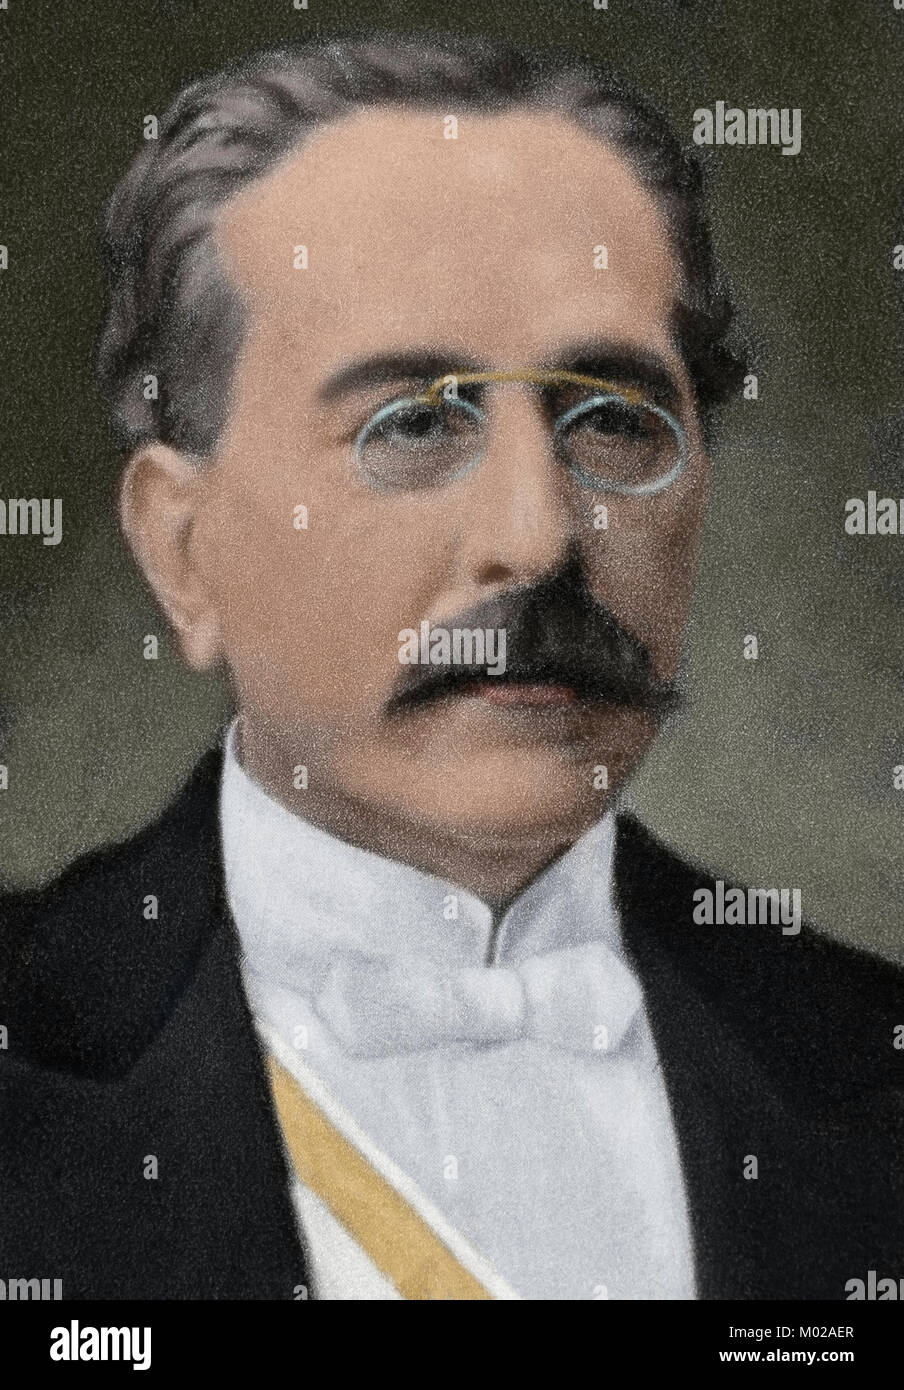 Camilo Fabra and Fontanills (1833-1902). First Marquis of Alella. Industrial, aristocrat and Catalan politician. He was deputy, senator and mayor of Barcelona in 1893. Portrait. Photography. Colored. Stock Photo